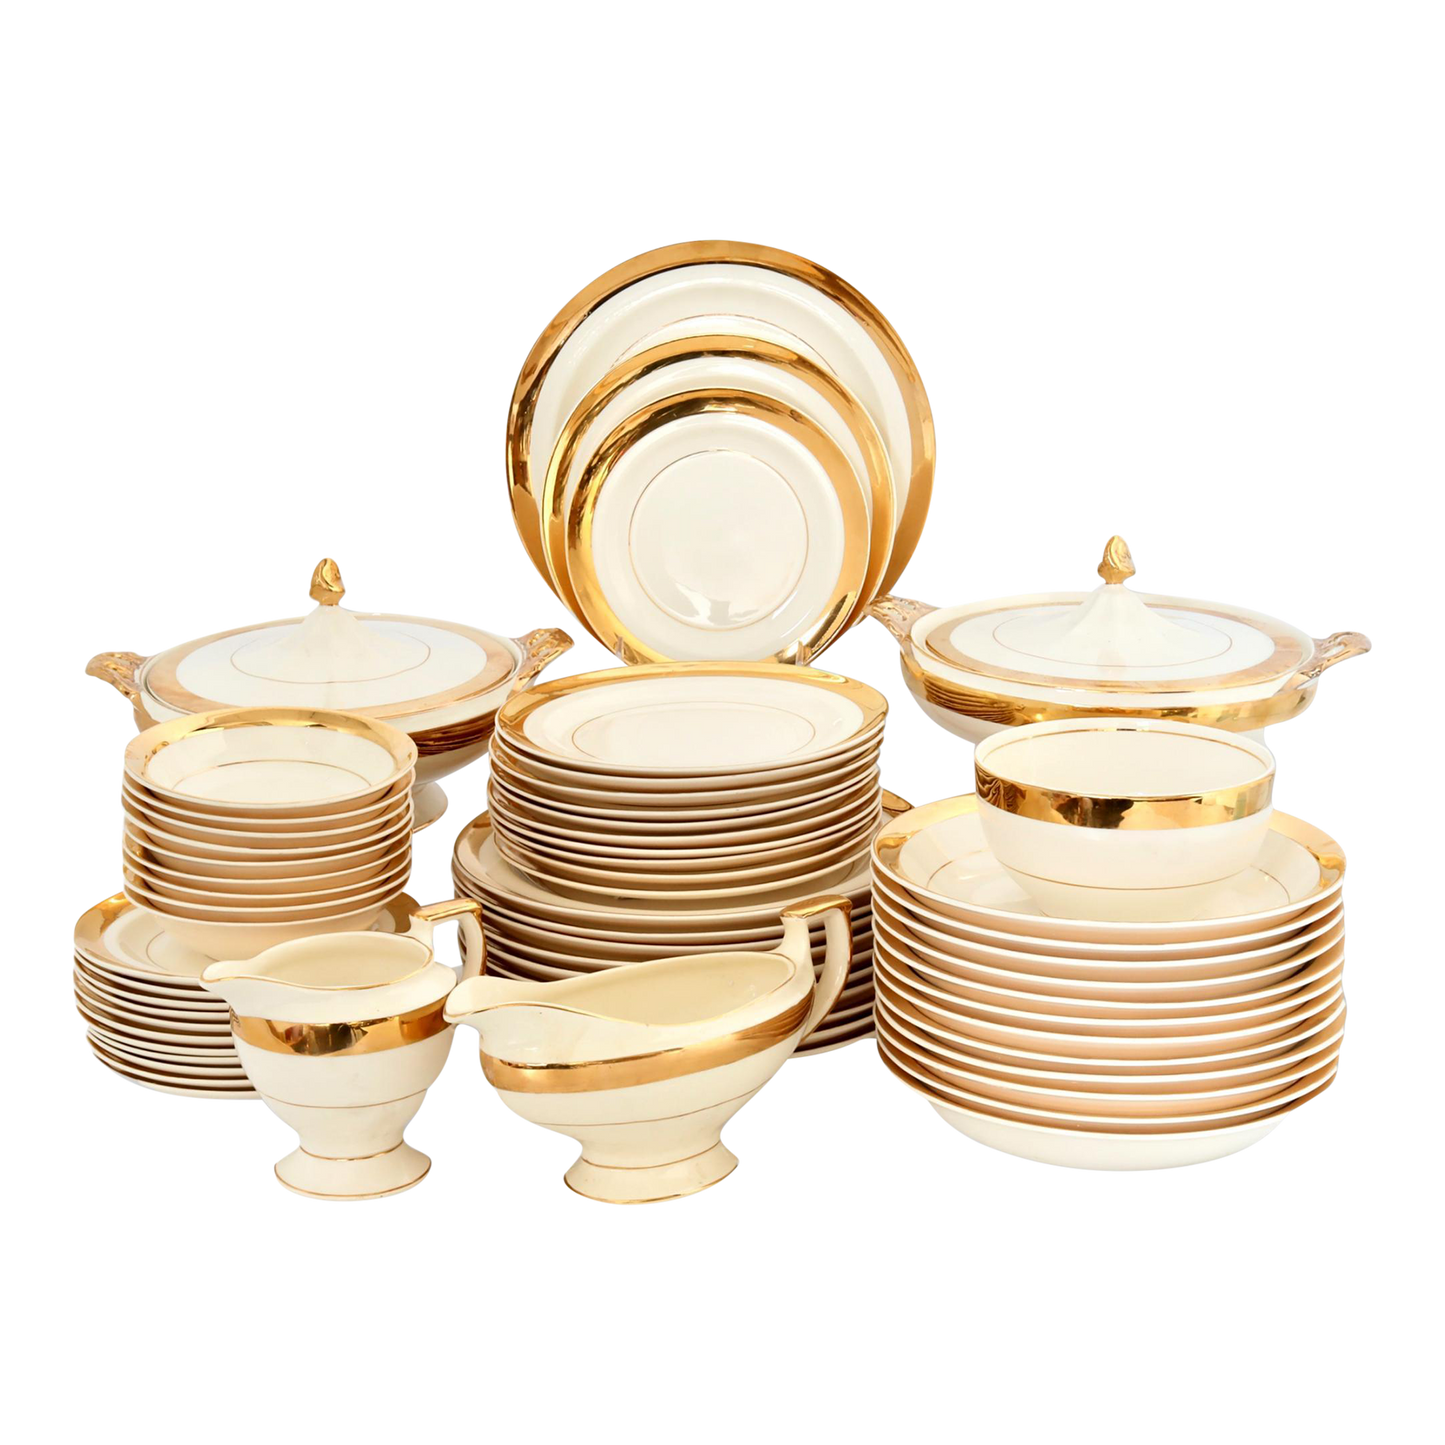 Midcentury Dinner Service with 22kt Gold Accents, 60 Pieces